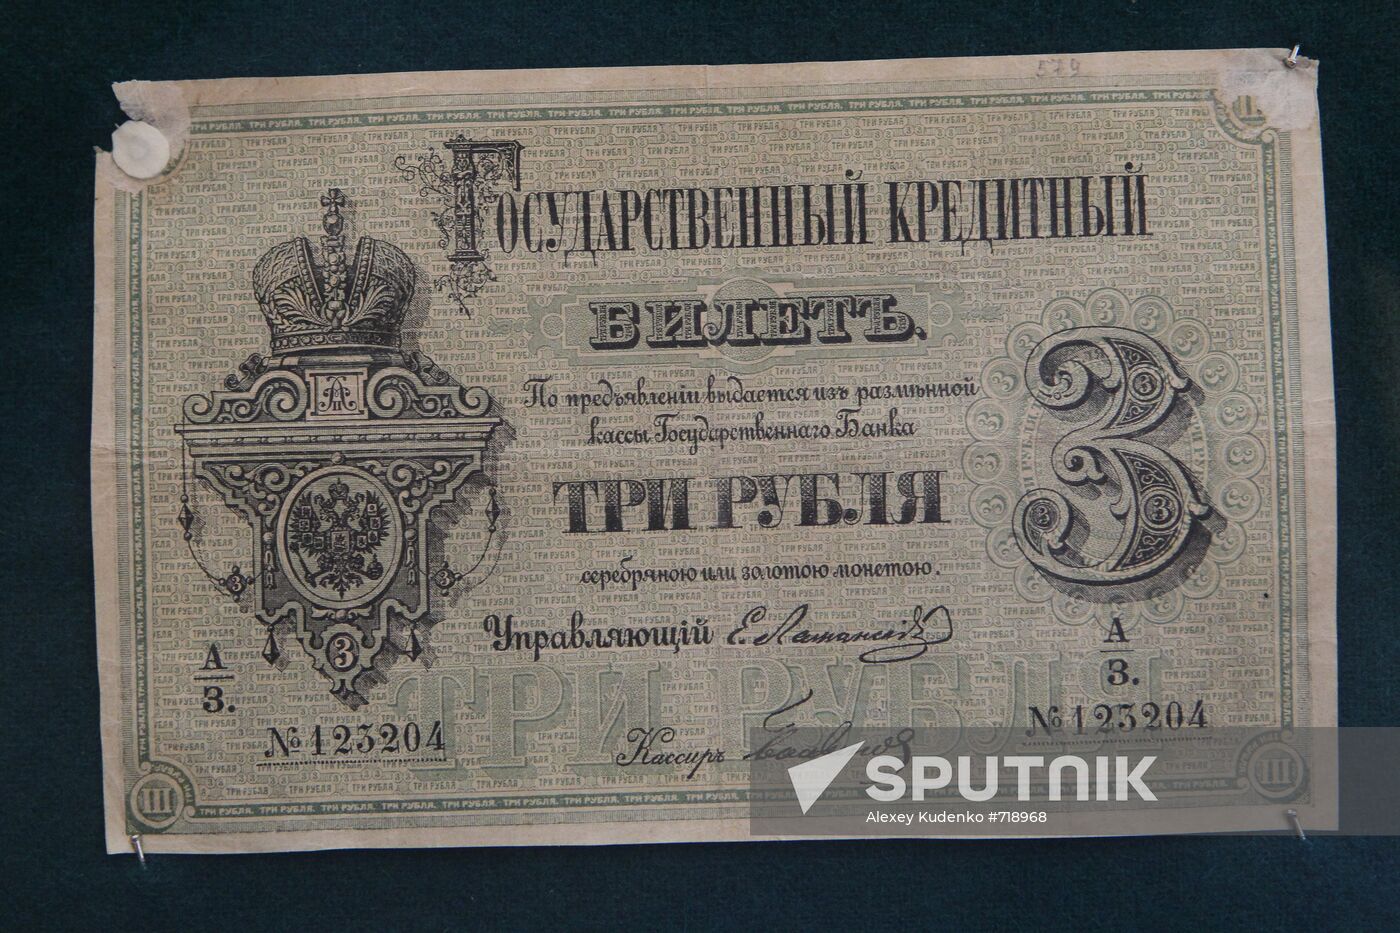 State bank bill of the late 19th century